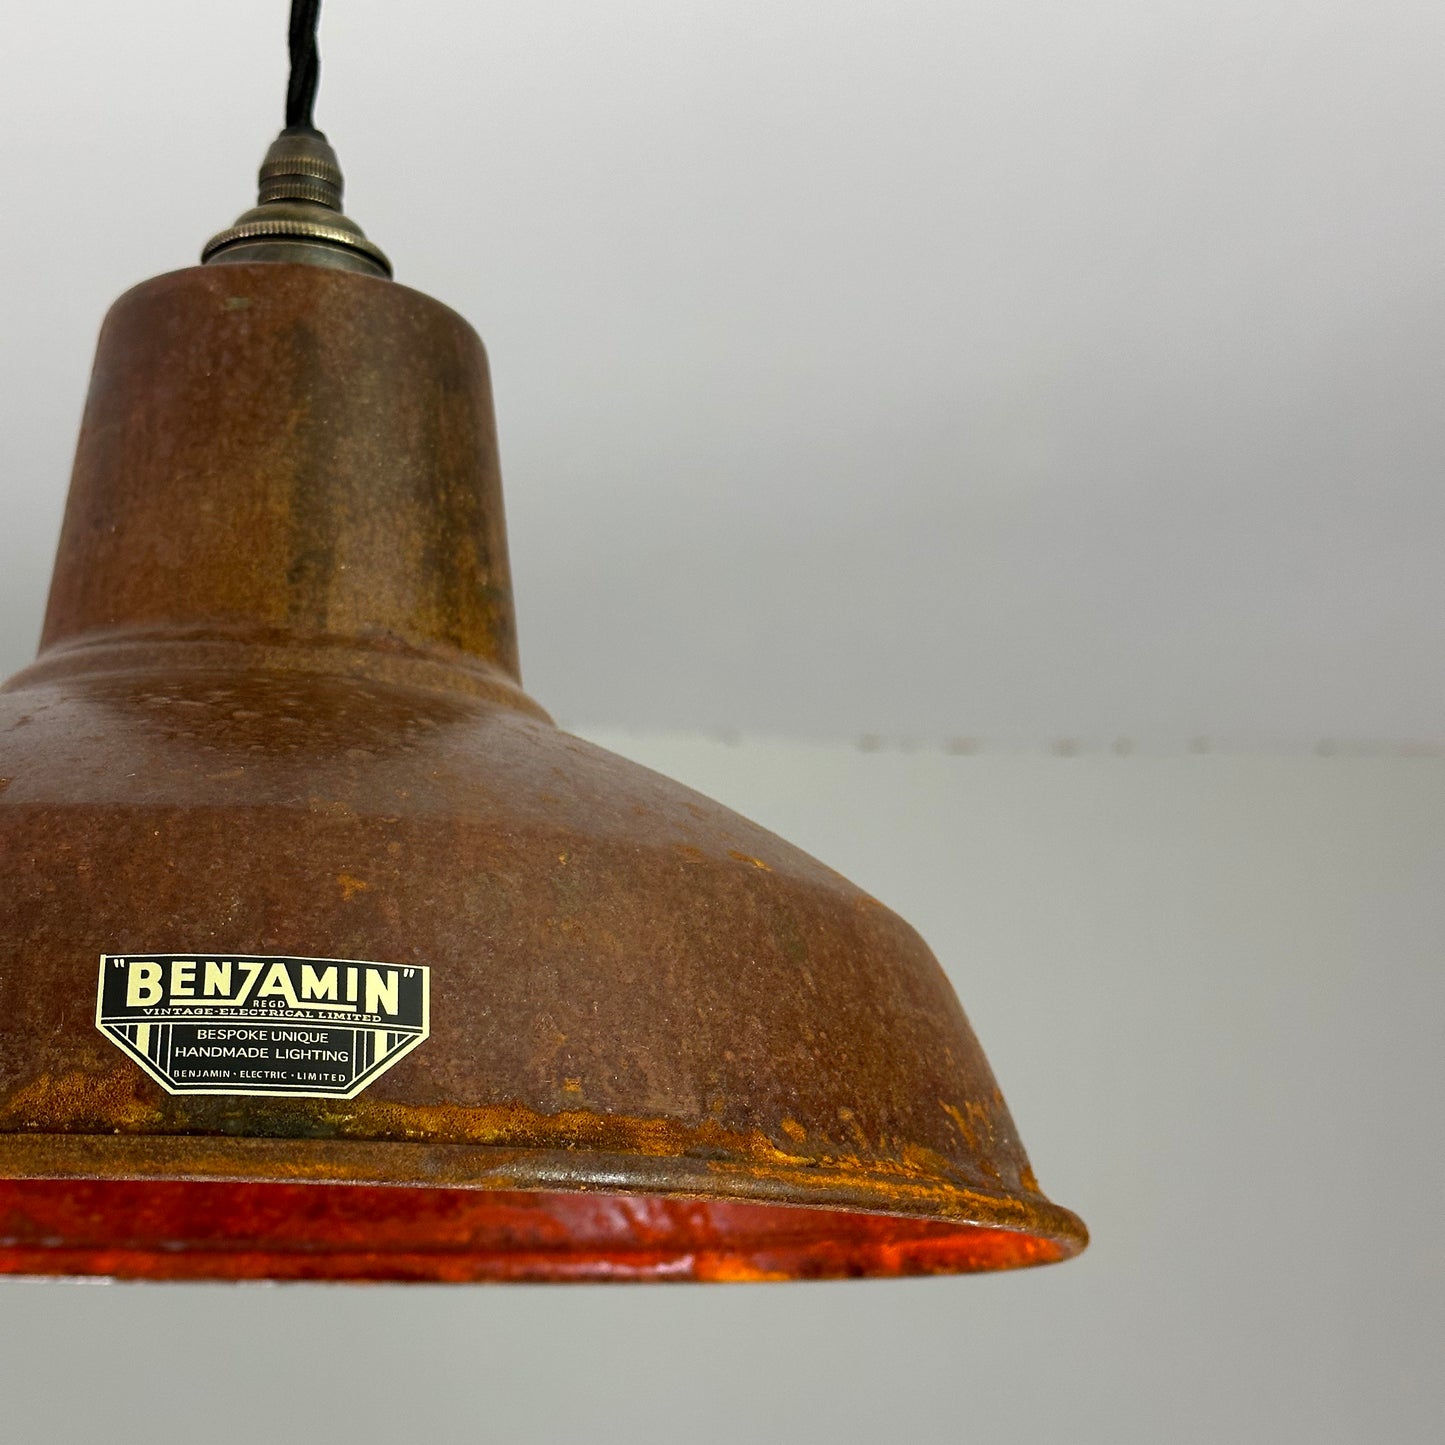 Filby ~ Rusted Solid Steel Industrial factory shade light ceiling dining room kitchen table vintage edison filament lamps pendant 12.5 Inch